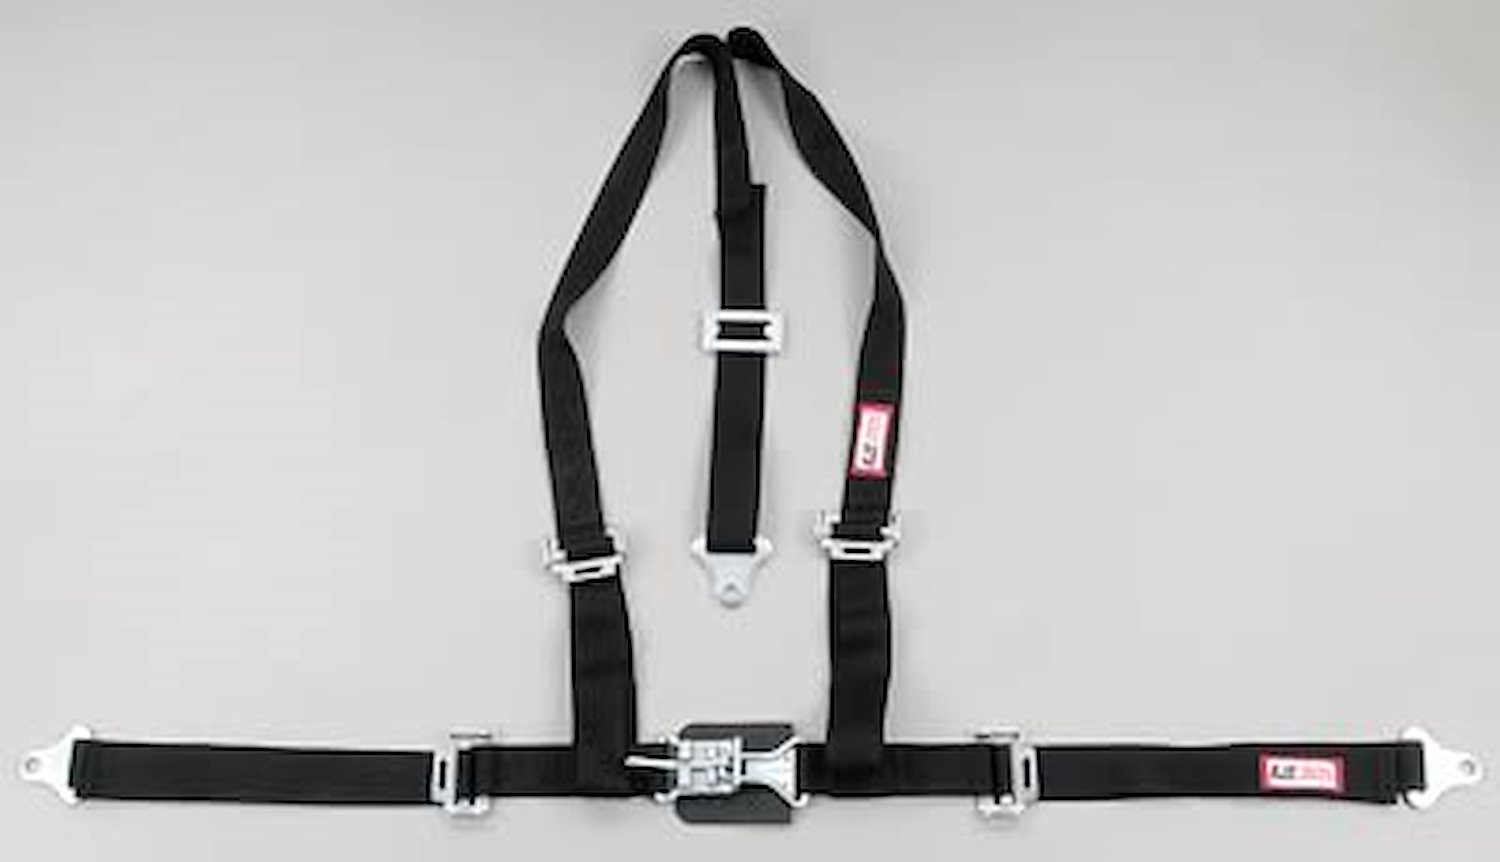 NON-SFI L&L HARNESS 3 PULL DOWN Lap Belt SEWN IN 2 S.H. Individual FLOOR Mount ALL WRAP ENDS RED